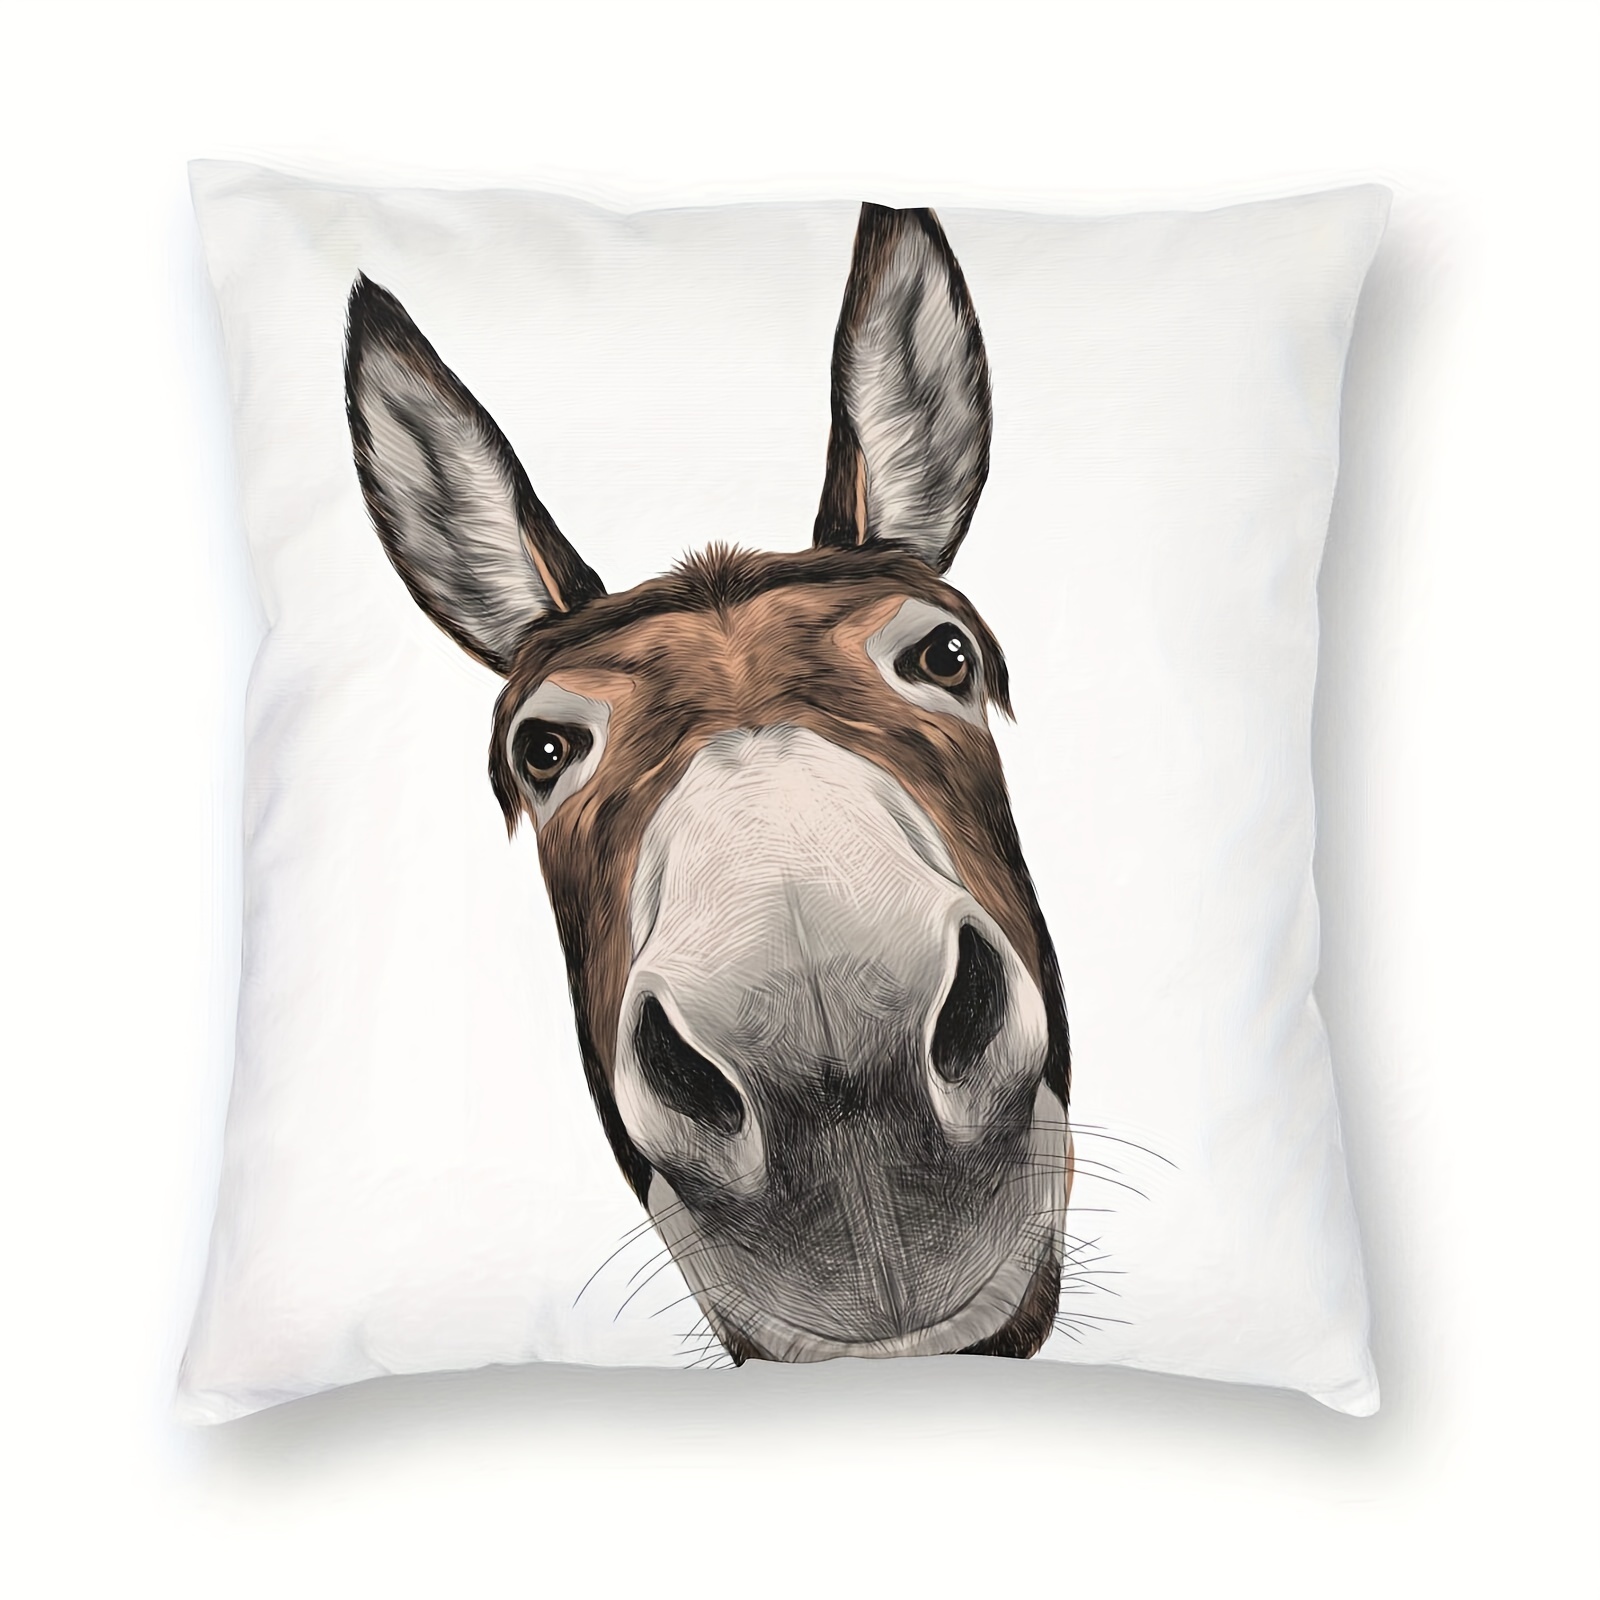 

1pc Farmhouse Donkey Cute Face Decorative Throw Pillow Covers 18x18 Inch Pillows Case Square Cushion Cover Cases Pillowcase With Zipper Sofa Home Decor For Couch Bed Patio Car